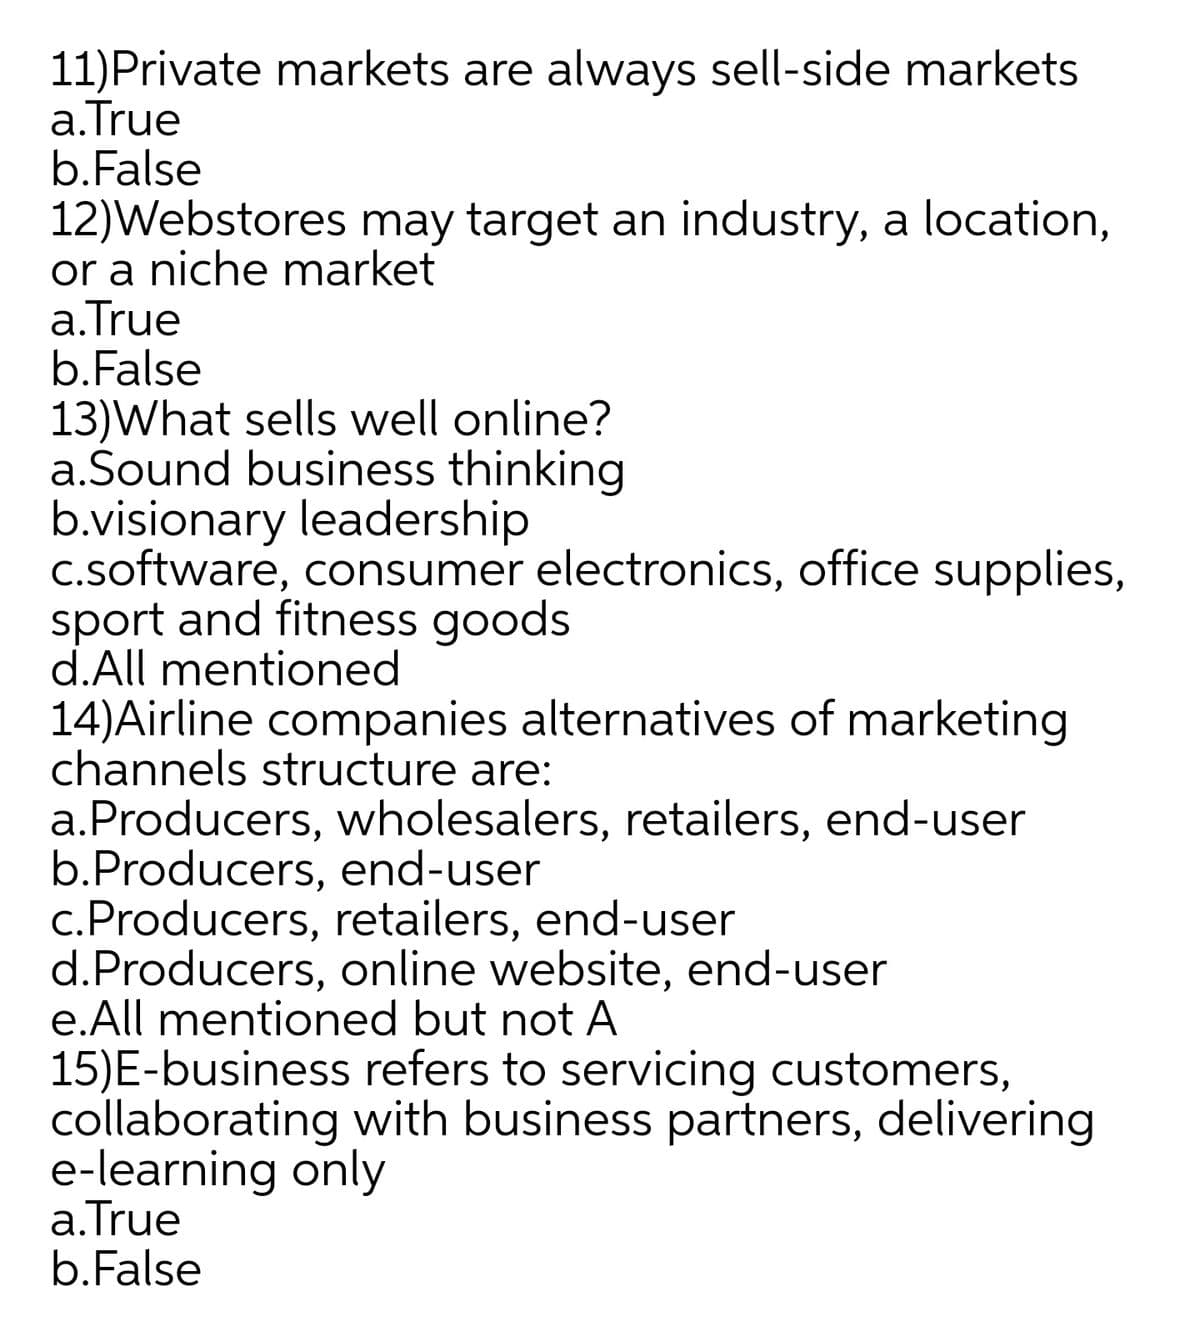 11)Private markets are always sell-side markets
a.True
b.False
12)Webstores may target an industry, a location,
or a niche market
a.True
b.False
13)What sells well online?
a.Šound business thinking
b.visionary leadership
c.software, consumer electronics, office supplies,
sport and fitness goods
d.All mentioned
14)Airline companies alternatives of marketing
channels structure are:
a.Producers, wholesalers, retailers, end-user
b.Producers, end-user
c.Producers, retailers, end-user
d.Producers, online website, end-user
e.All mentioned but not A
15)E-business refers to servicing customers,
collaborating with business partners, delivering
e-learning only
a.True
b.False
